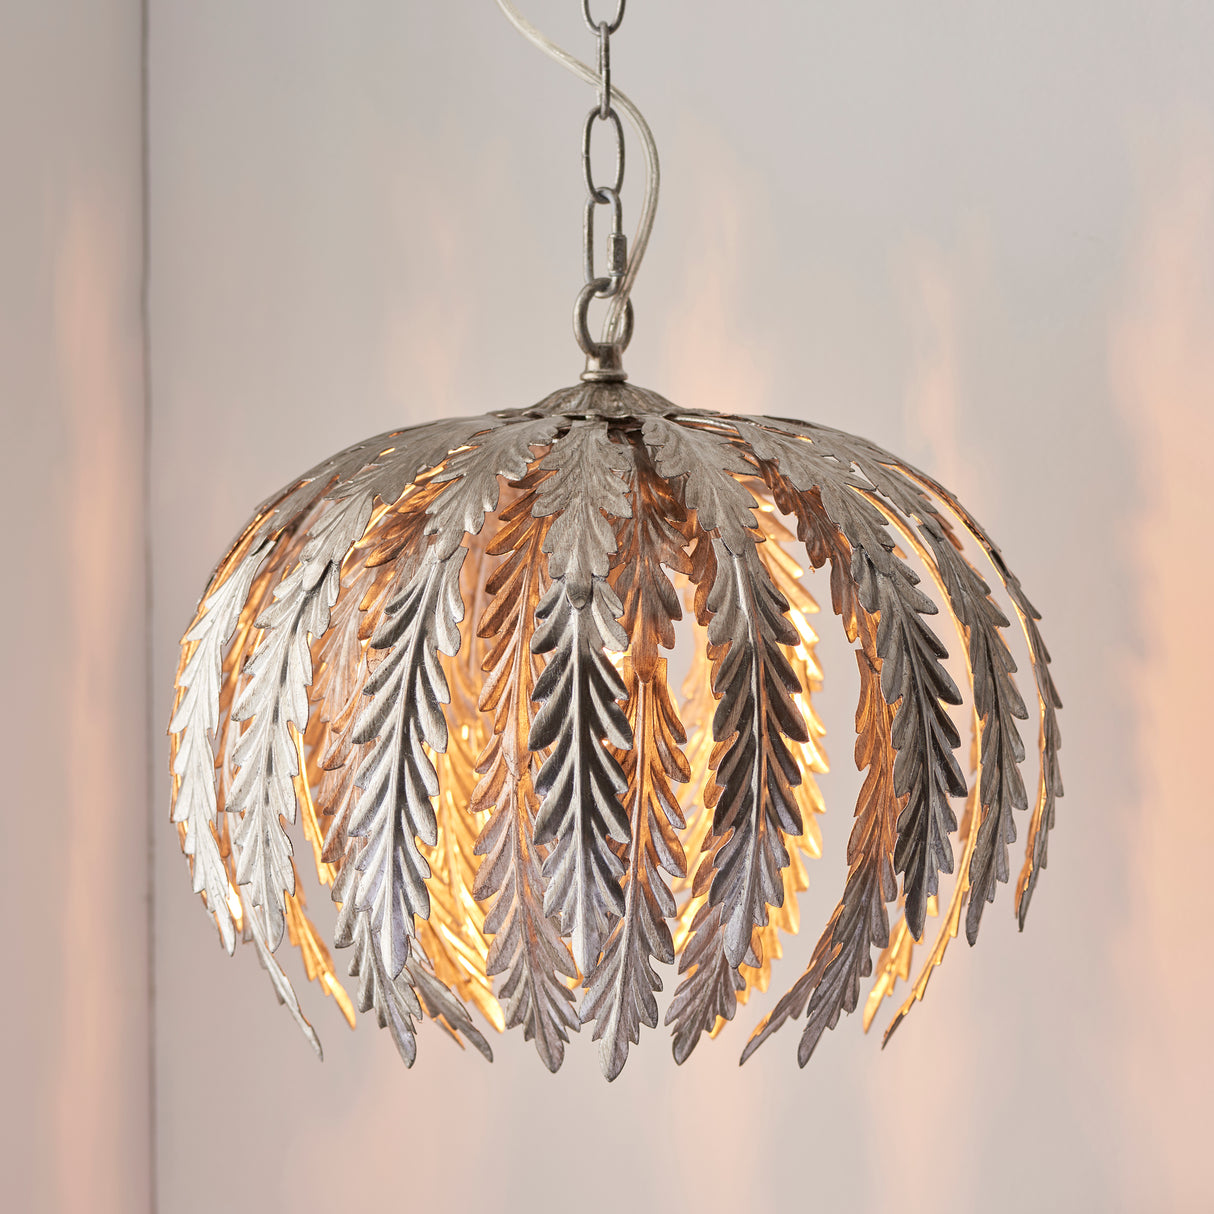 Delphine Small Pendant Ceiling Light Silver Leaf